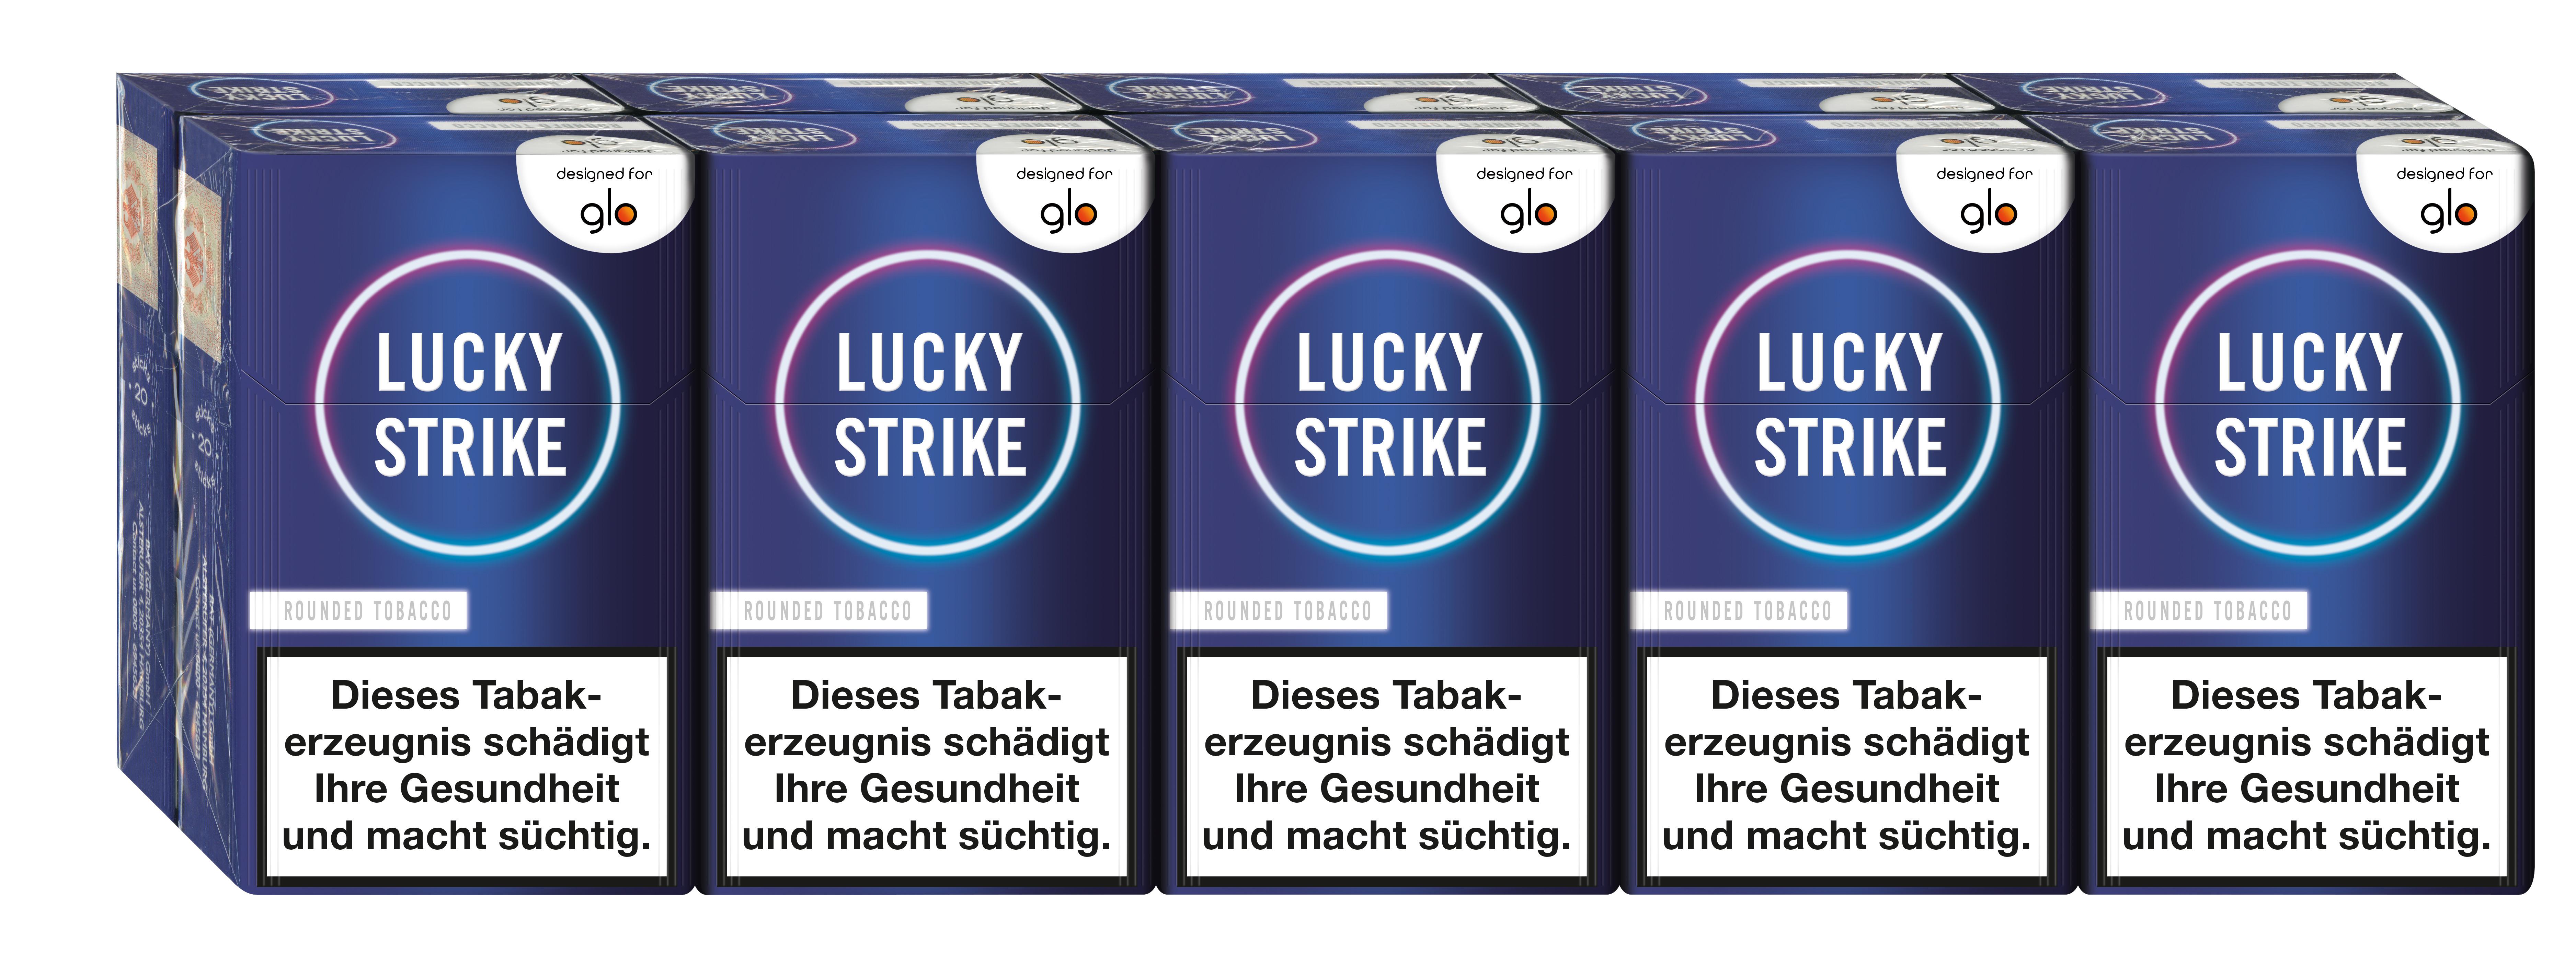 Lucky Strike for glo Rounded Tobacco 1 Stange